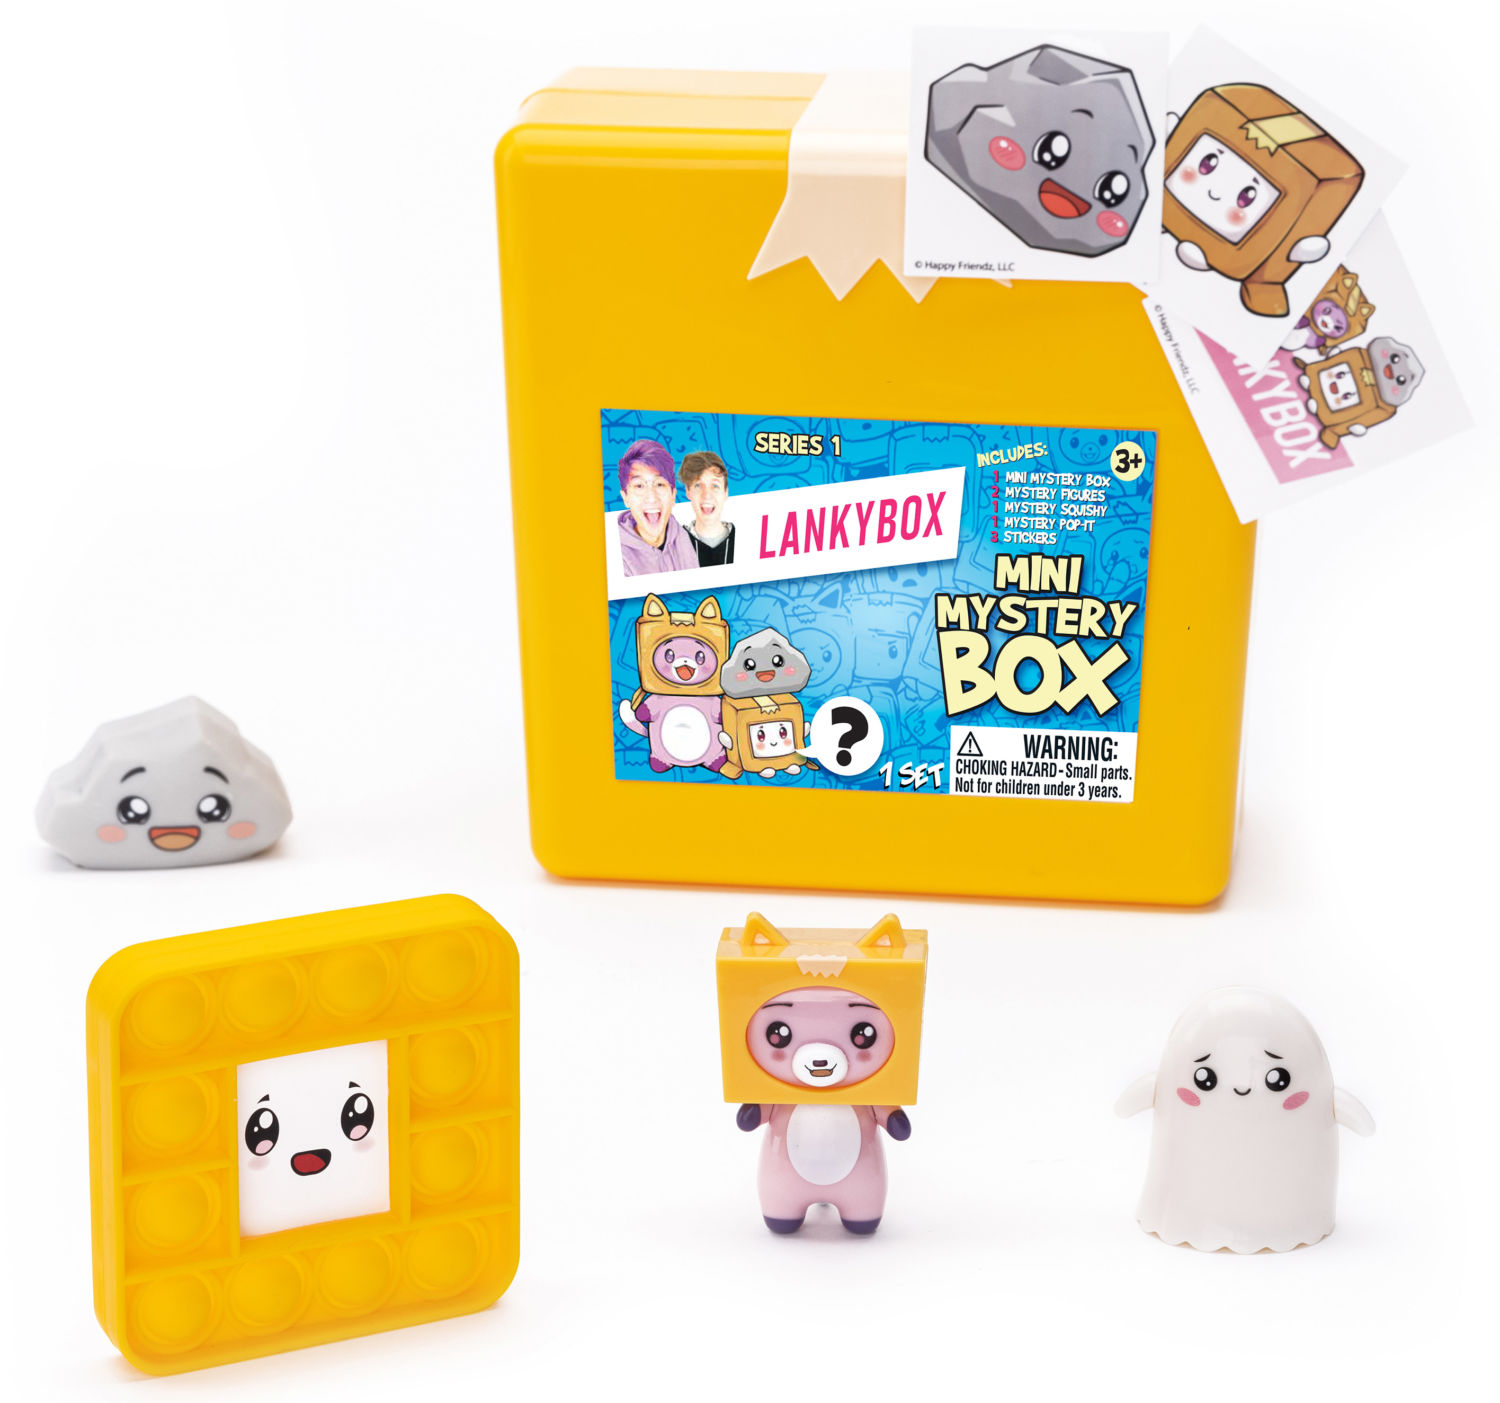 Silly Squishies Mystery Box